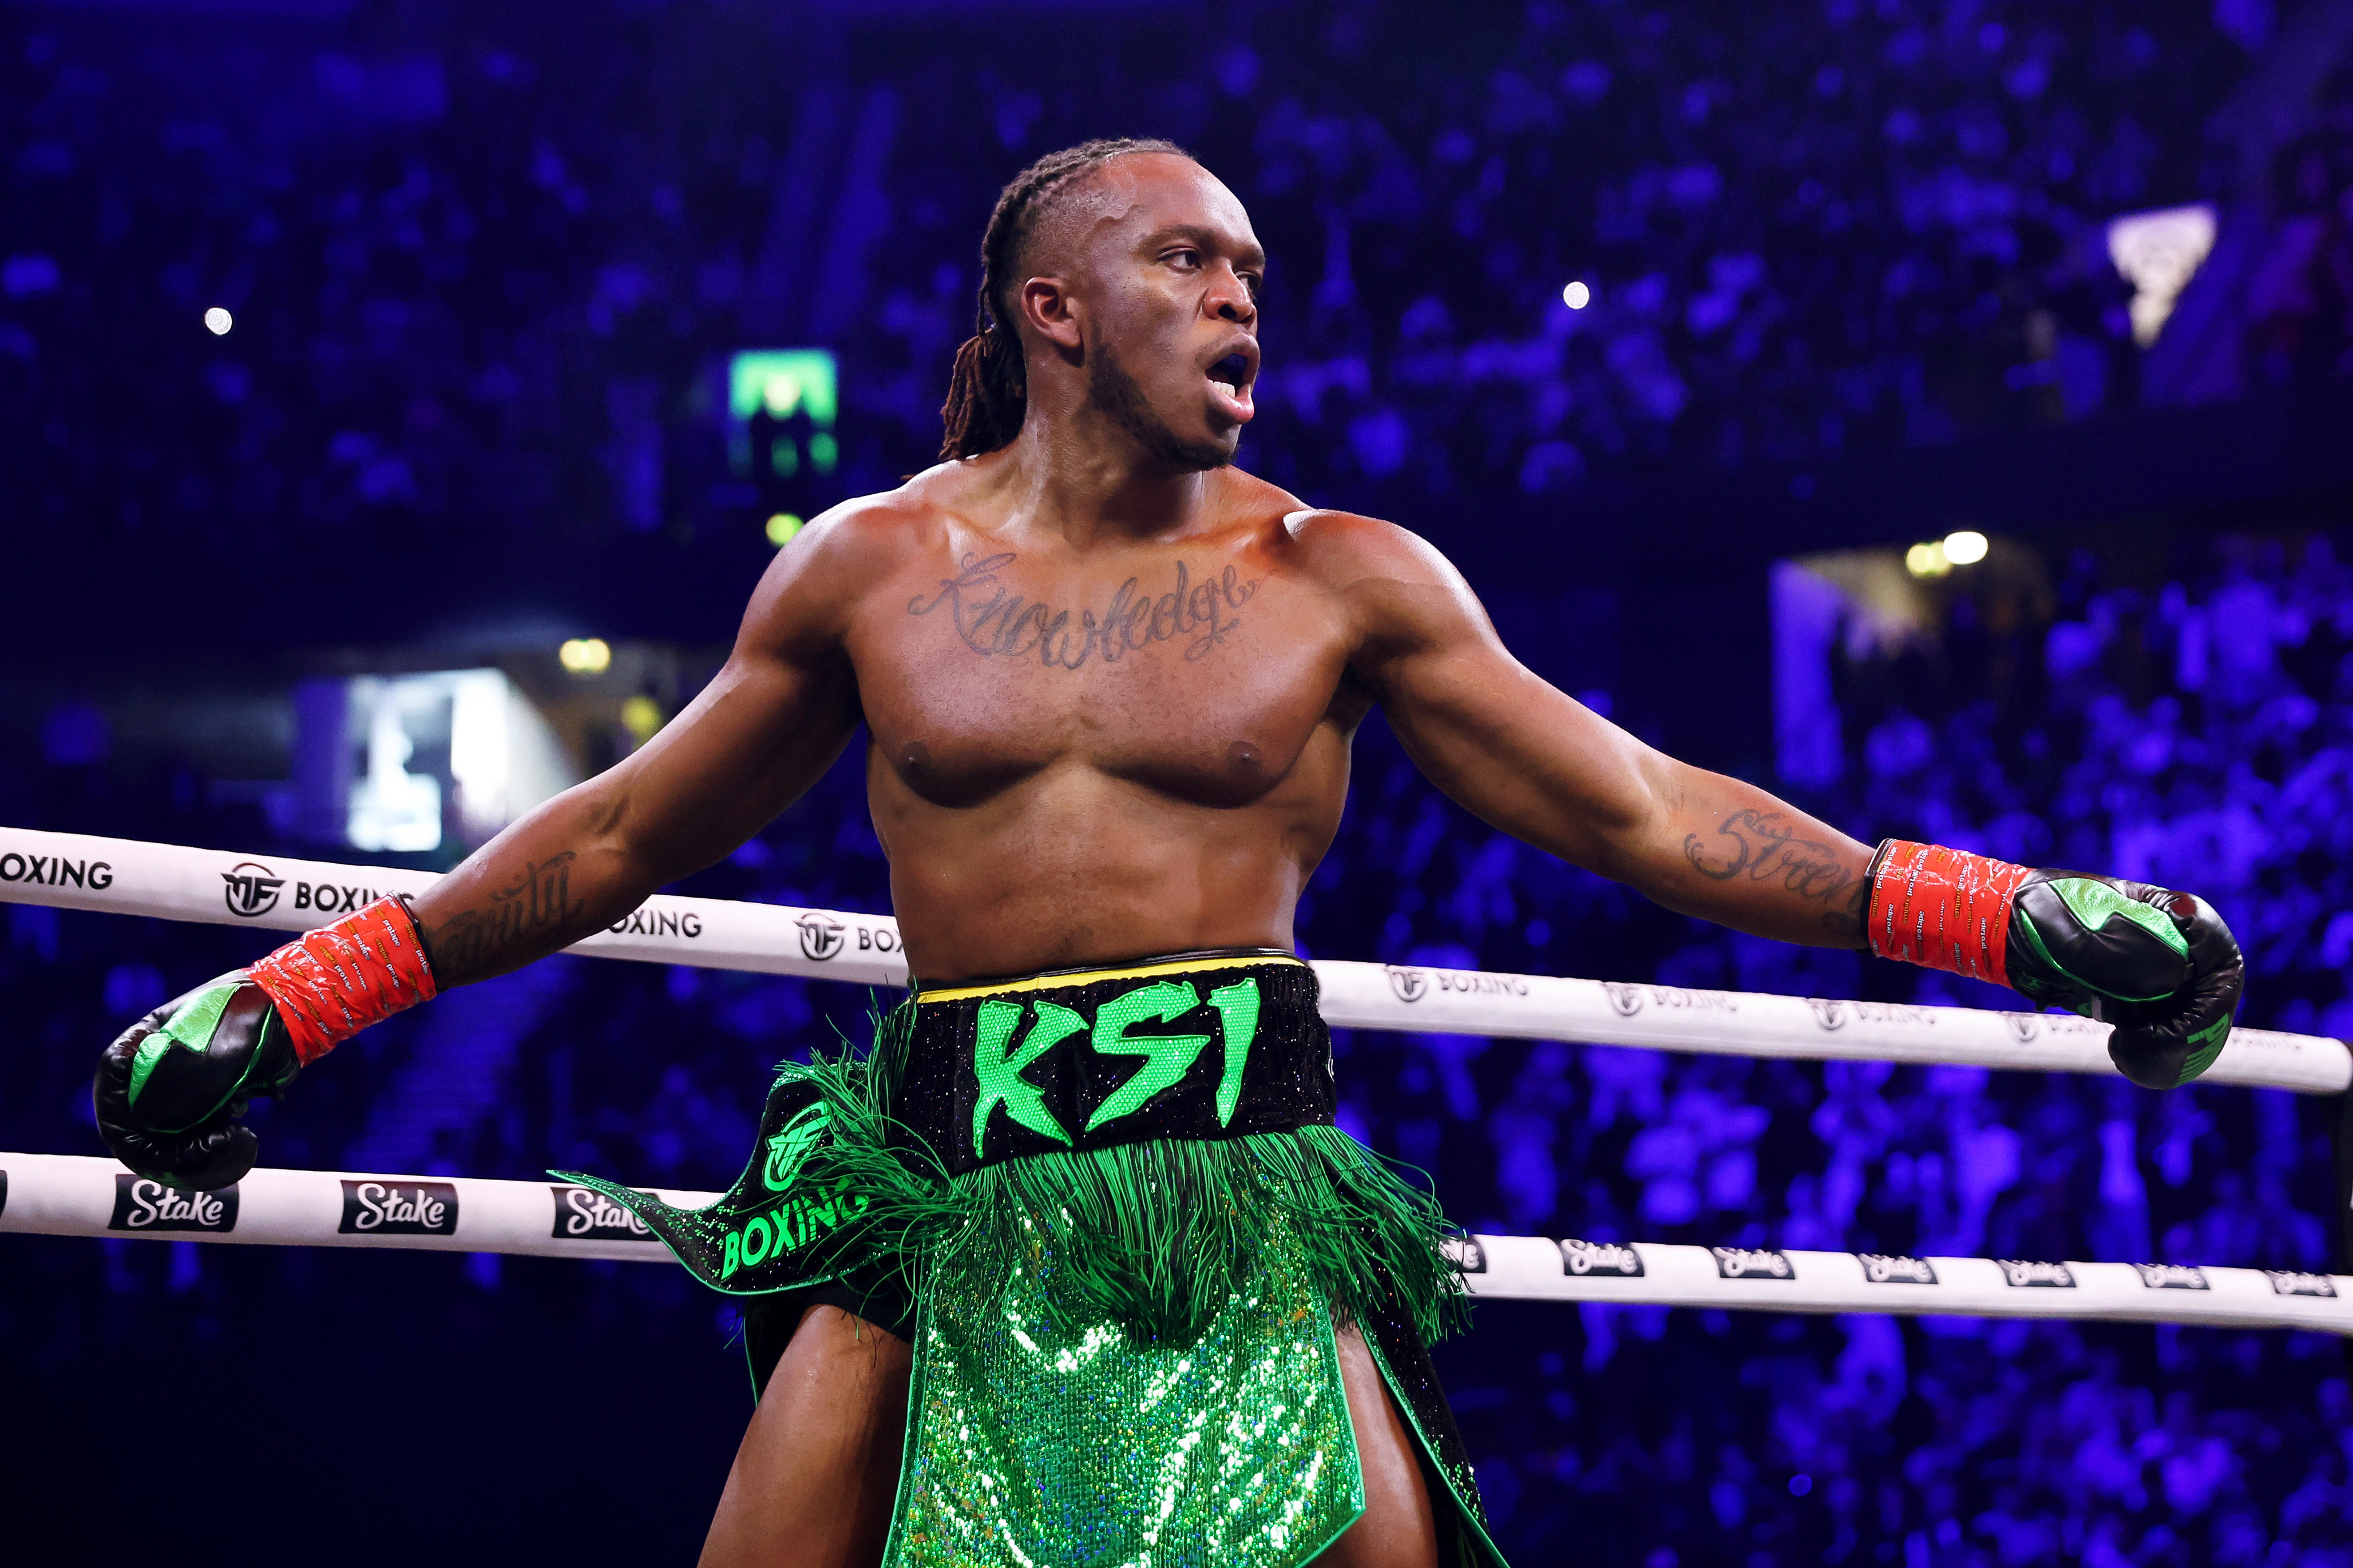 Fans of his rival KSI were quick to take the mick out of his new-look